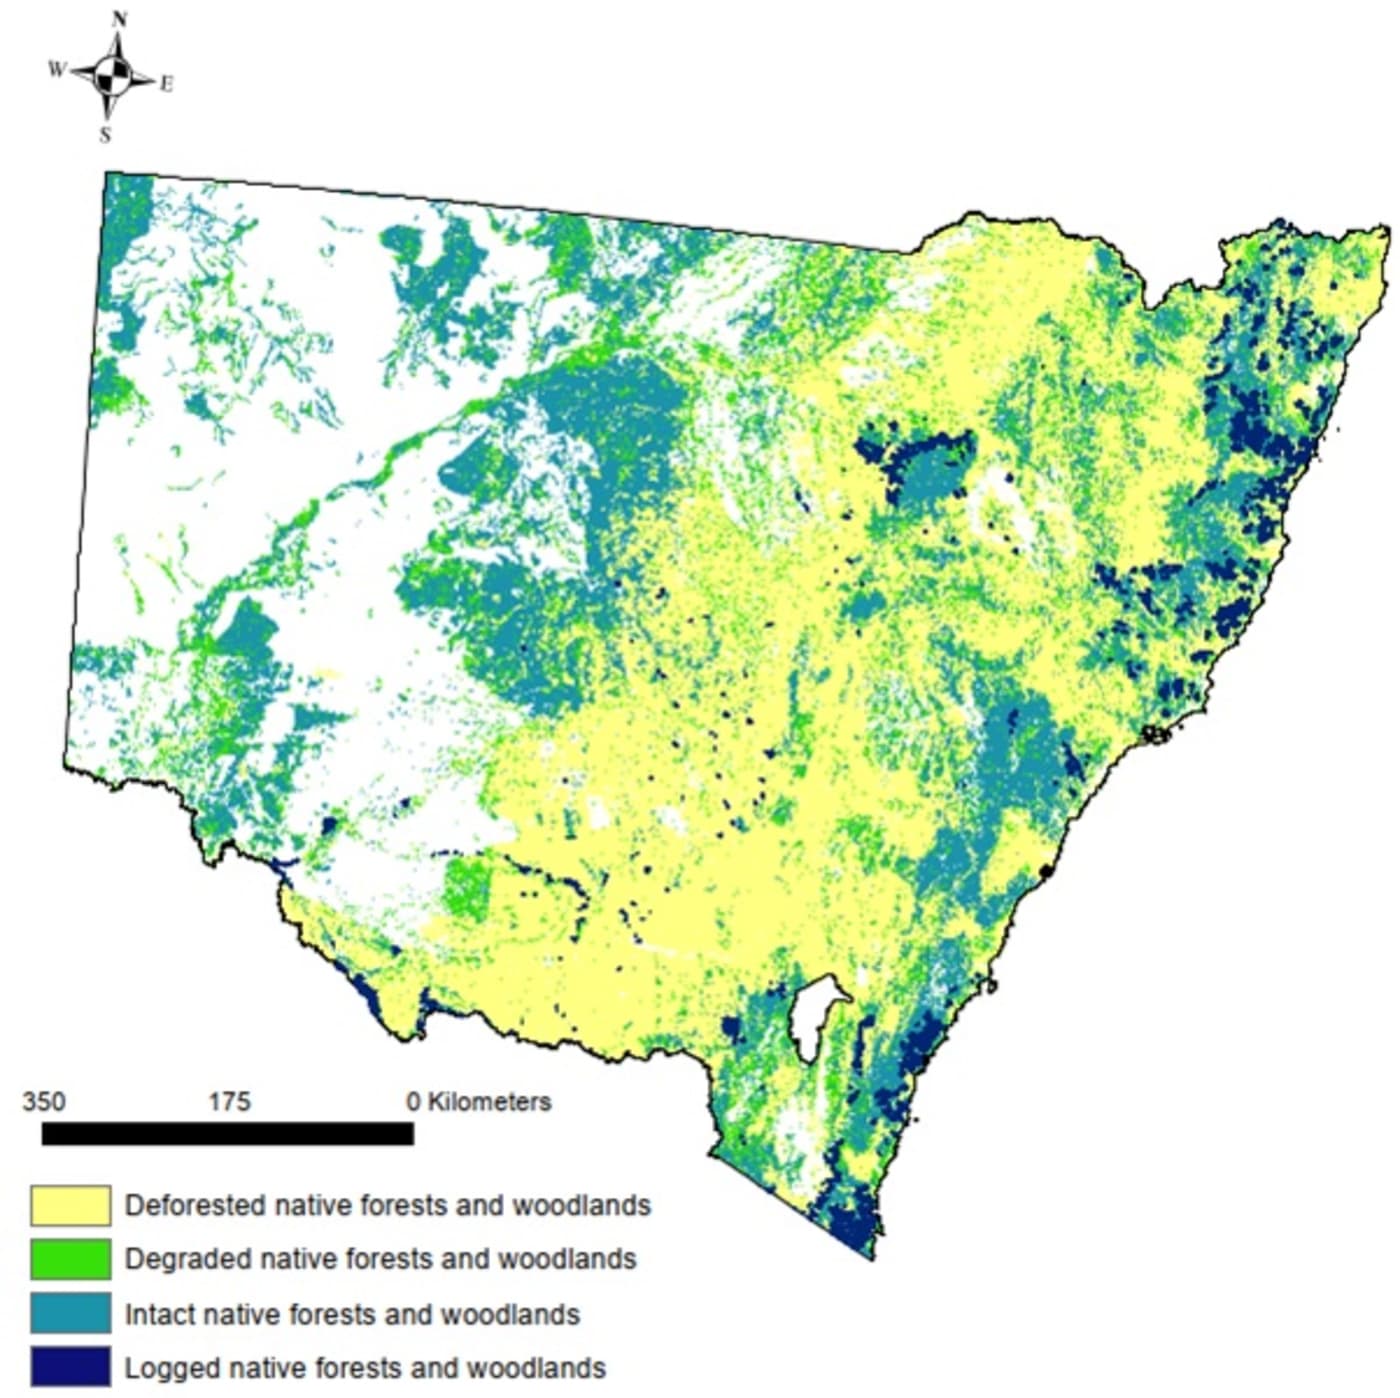 Map of deforested areas of NSW